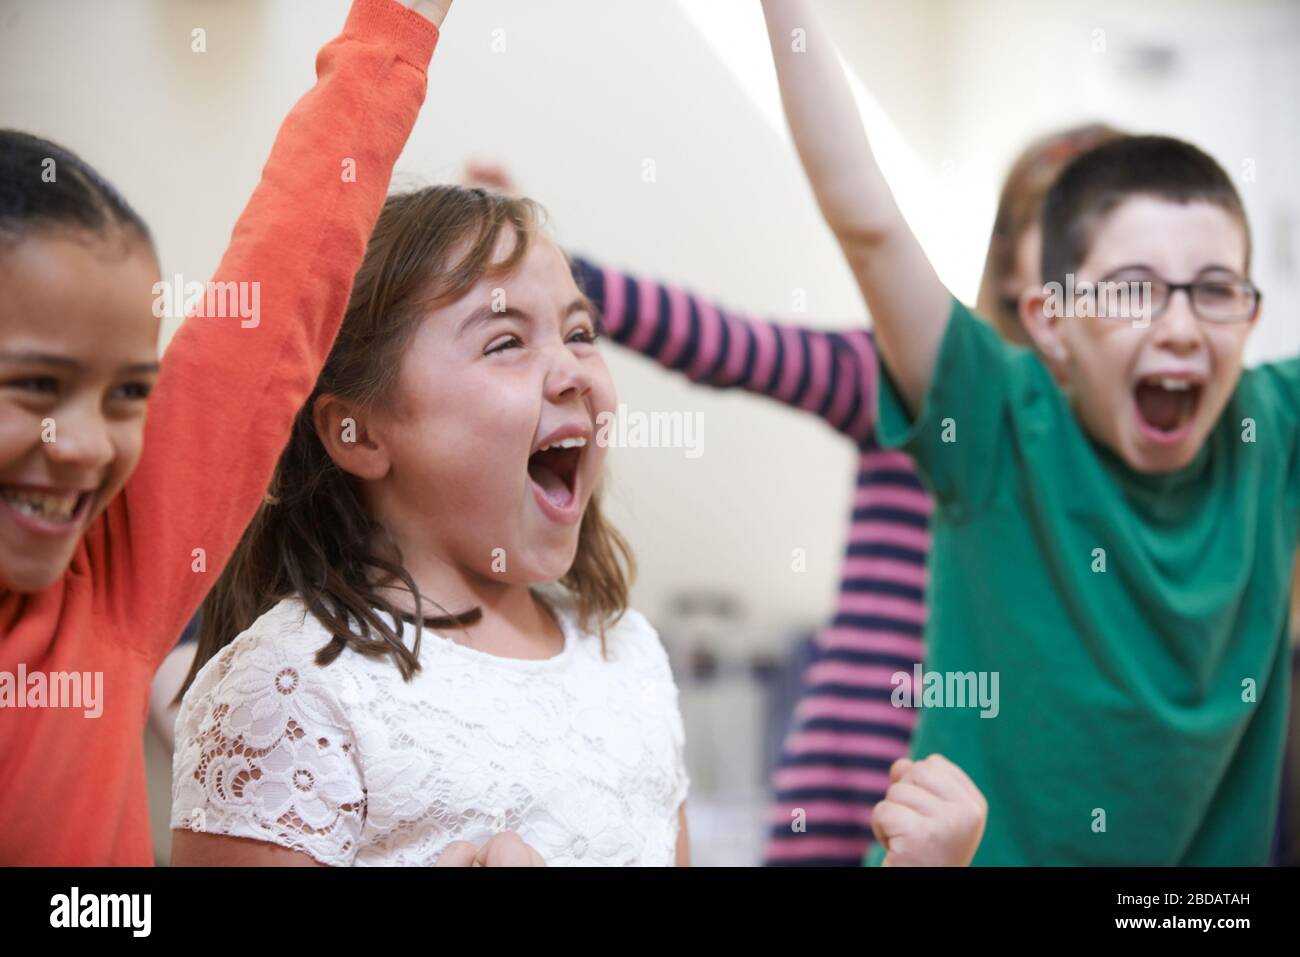 Group Of Excited Children At Stage School Enjoying Dance Class Together Stock Photo